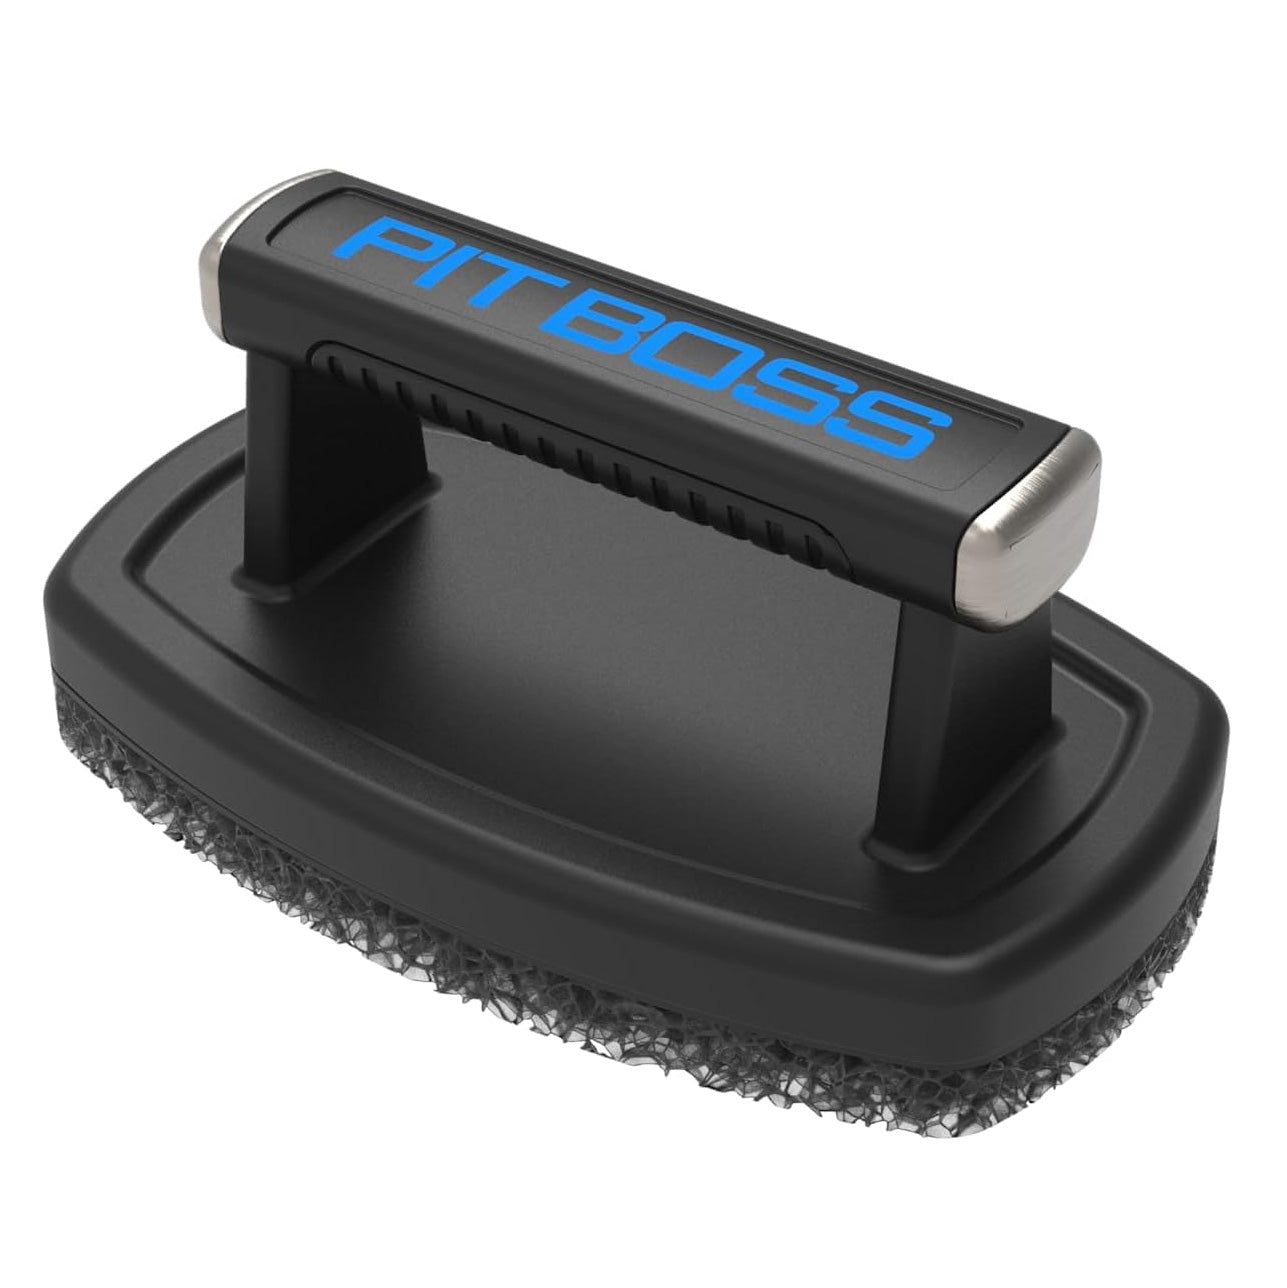 Pit Boss Ultimate Griddle Cleaning Scrub Brush Ultimate Griddle Collection 40935